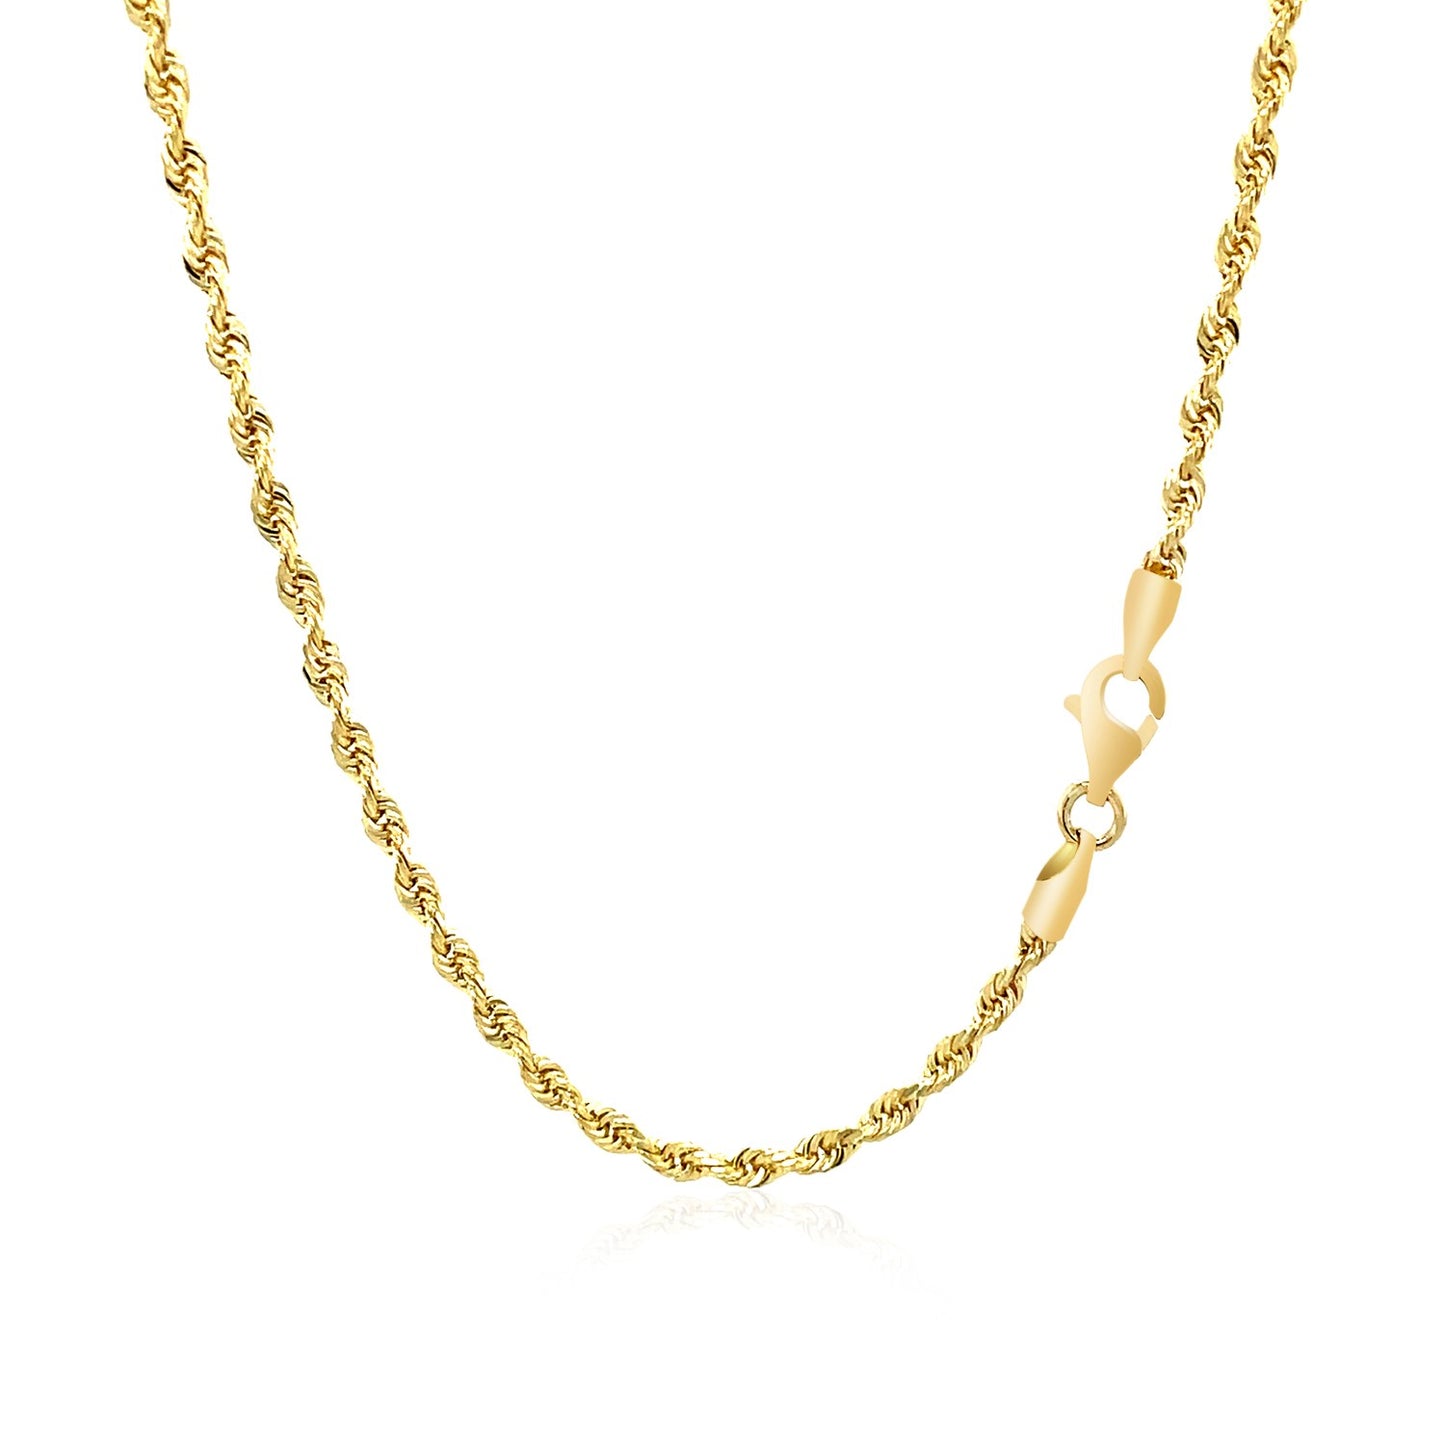 2.5mm 10k Yellow Gold Solid Diamond Cut Rope Chain